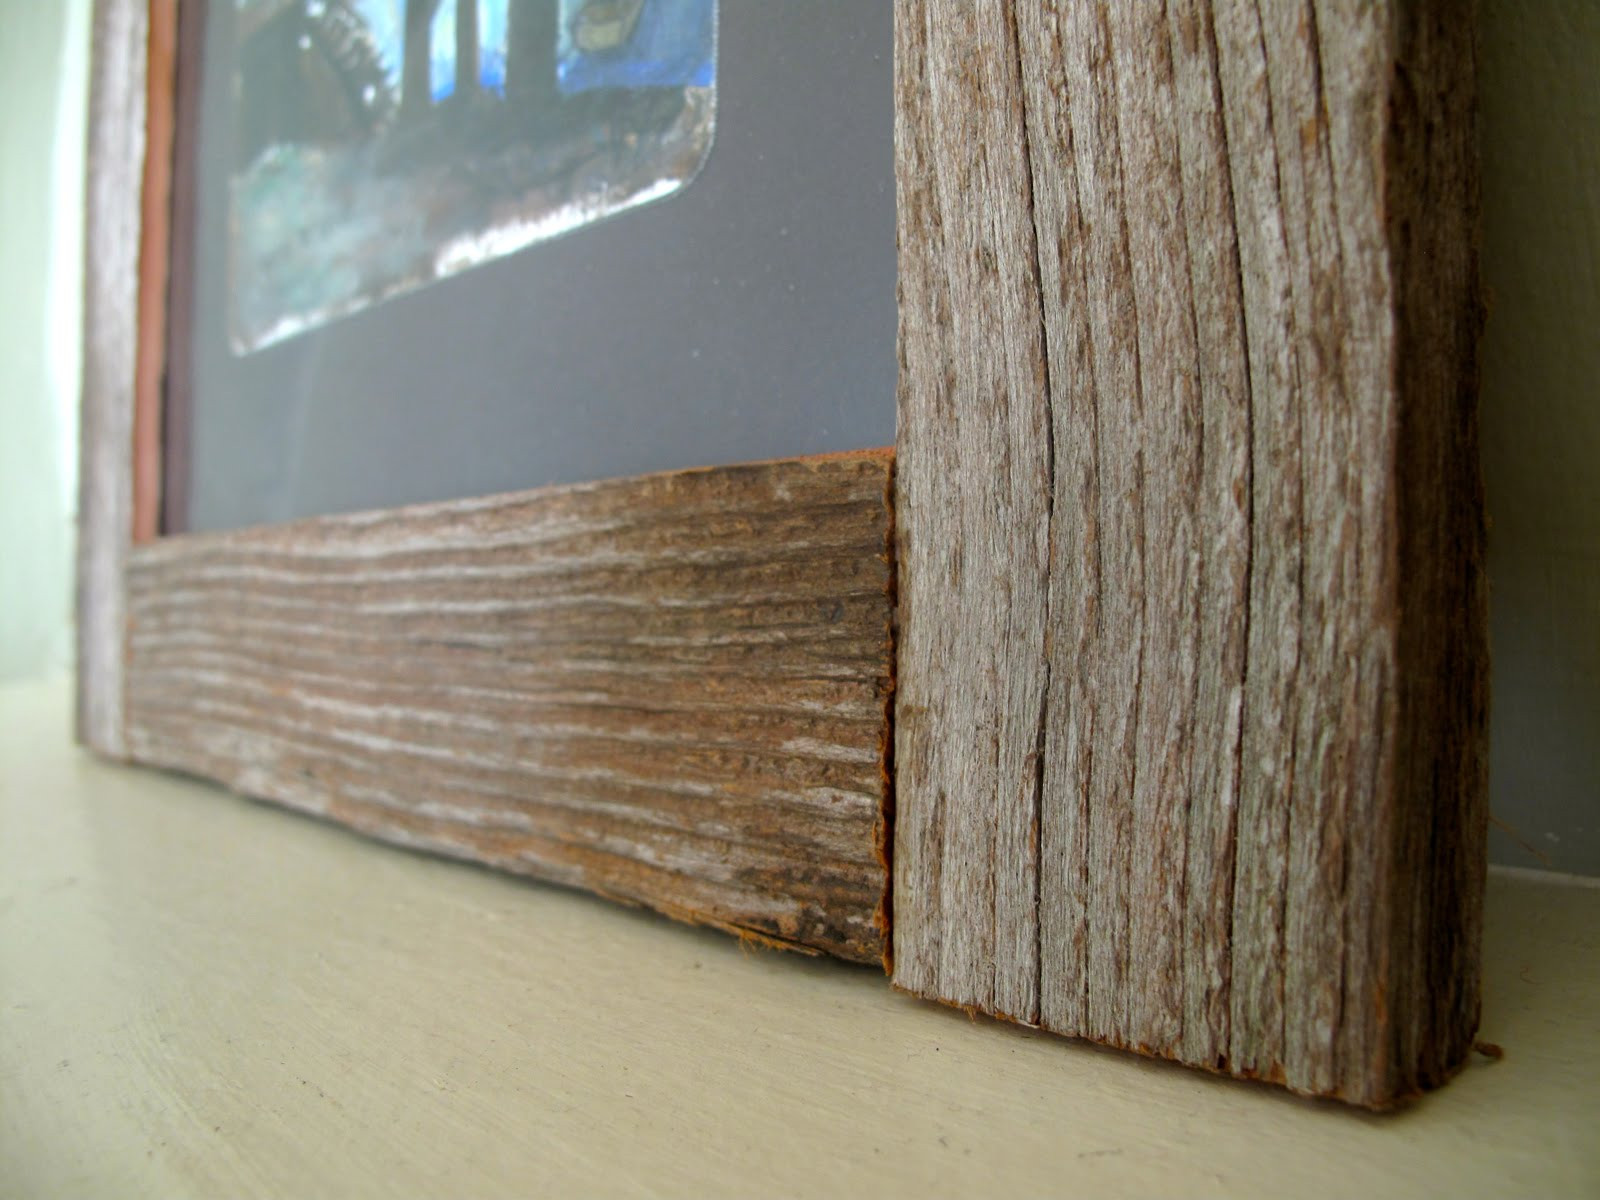 Wood Picture Frames DIY
 Diy Wood Picture Frame PDF Woodworking